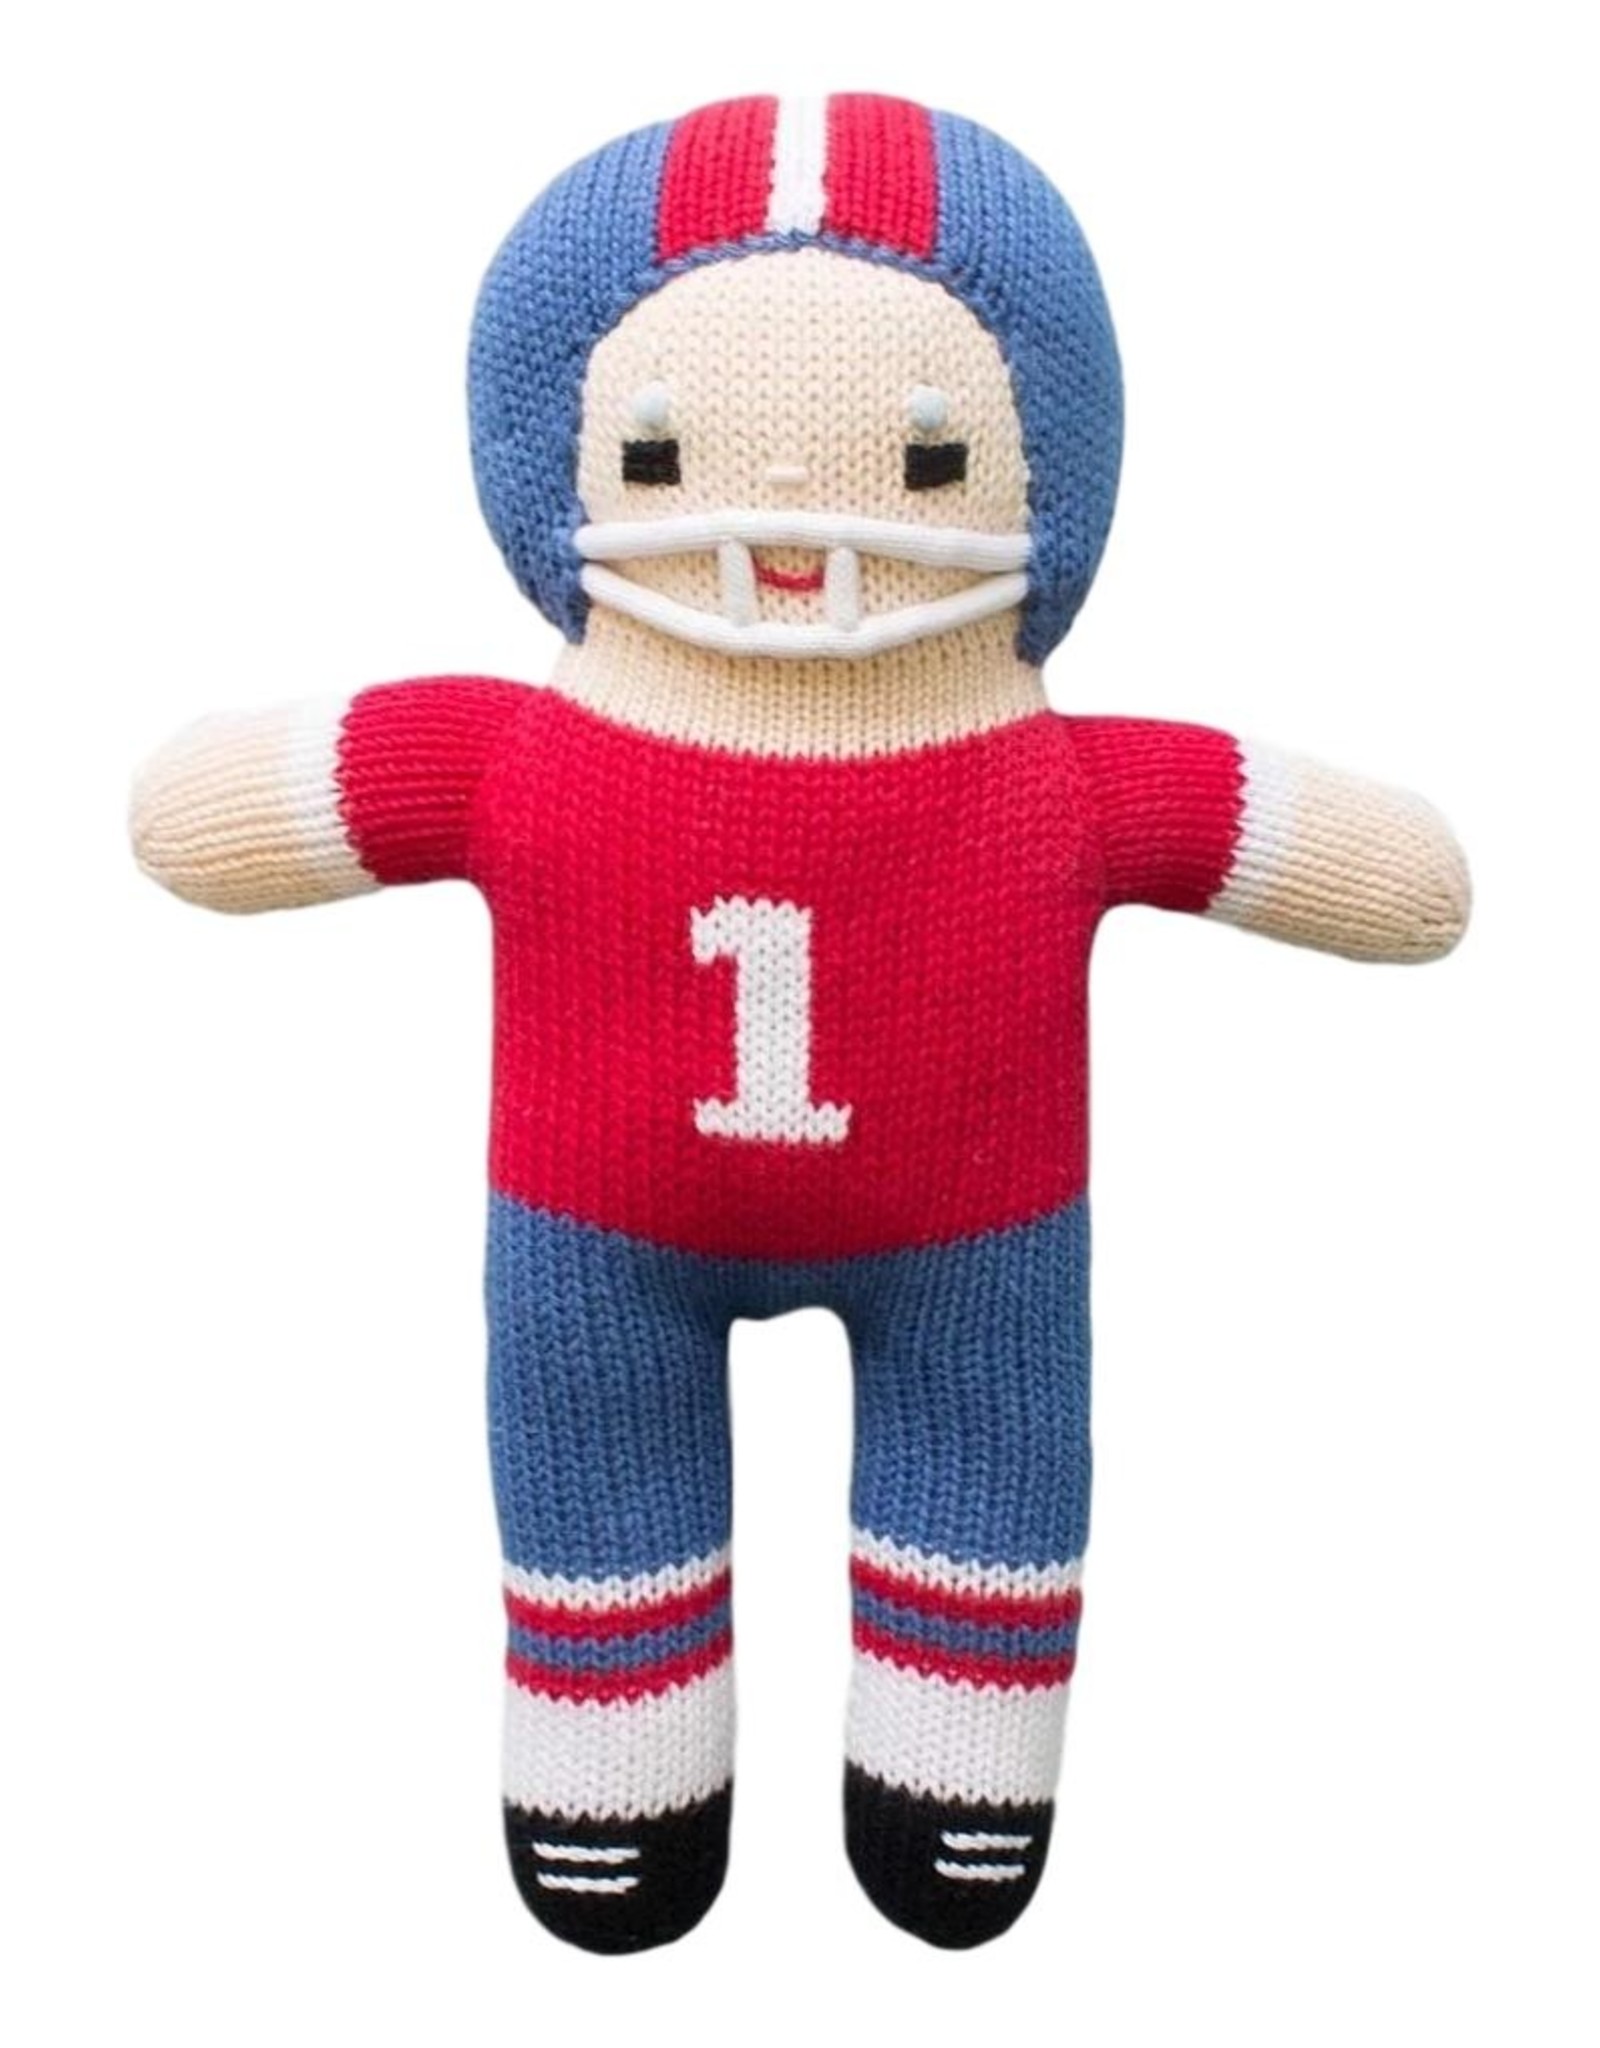 Zubels FP12 Football Player blue/red